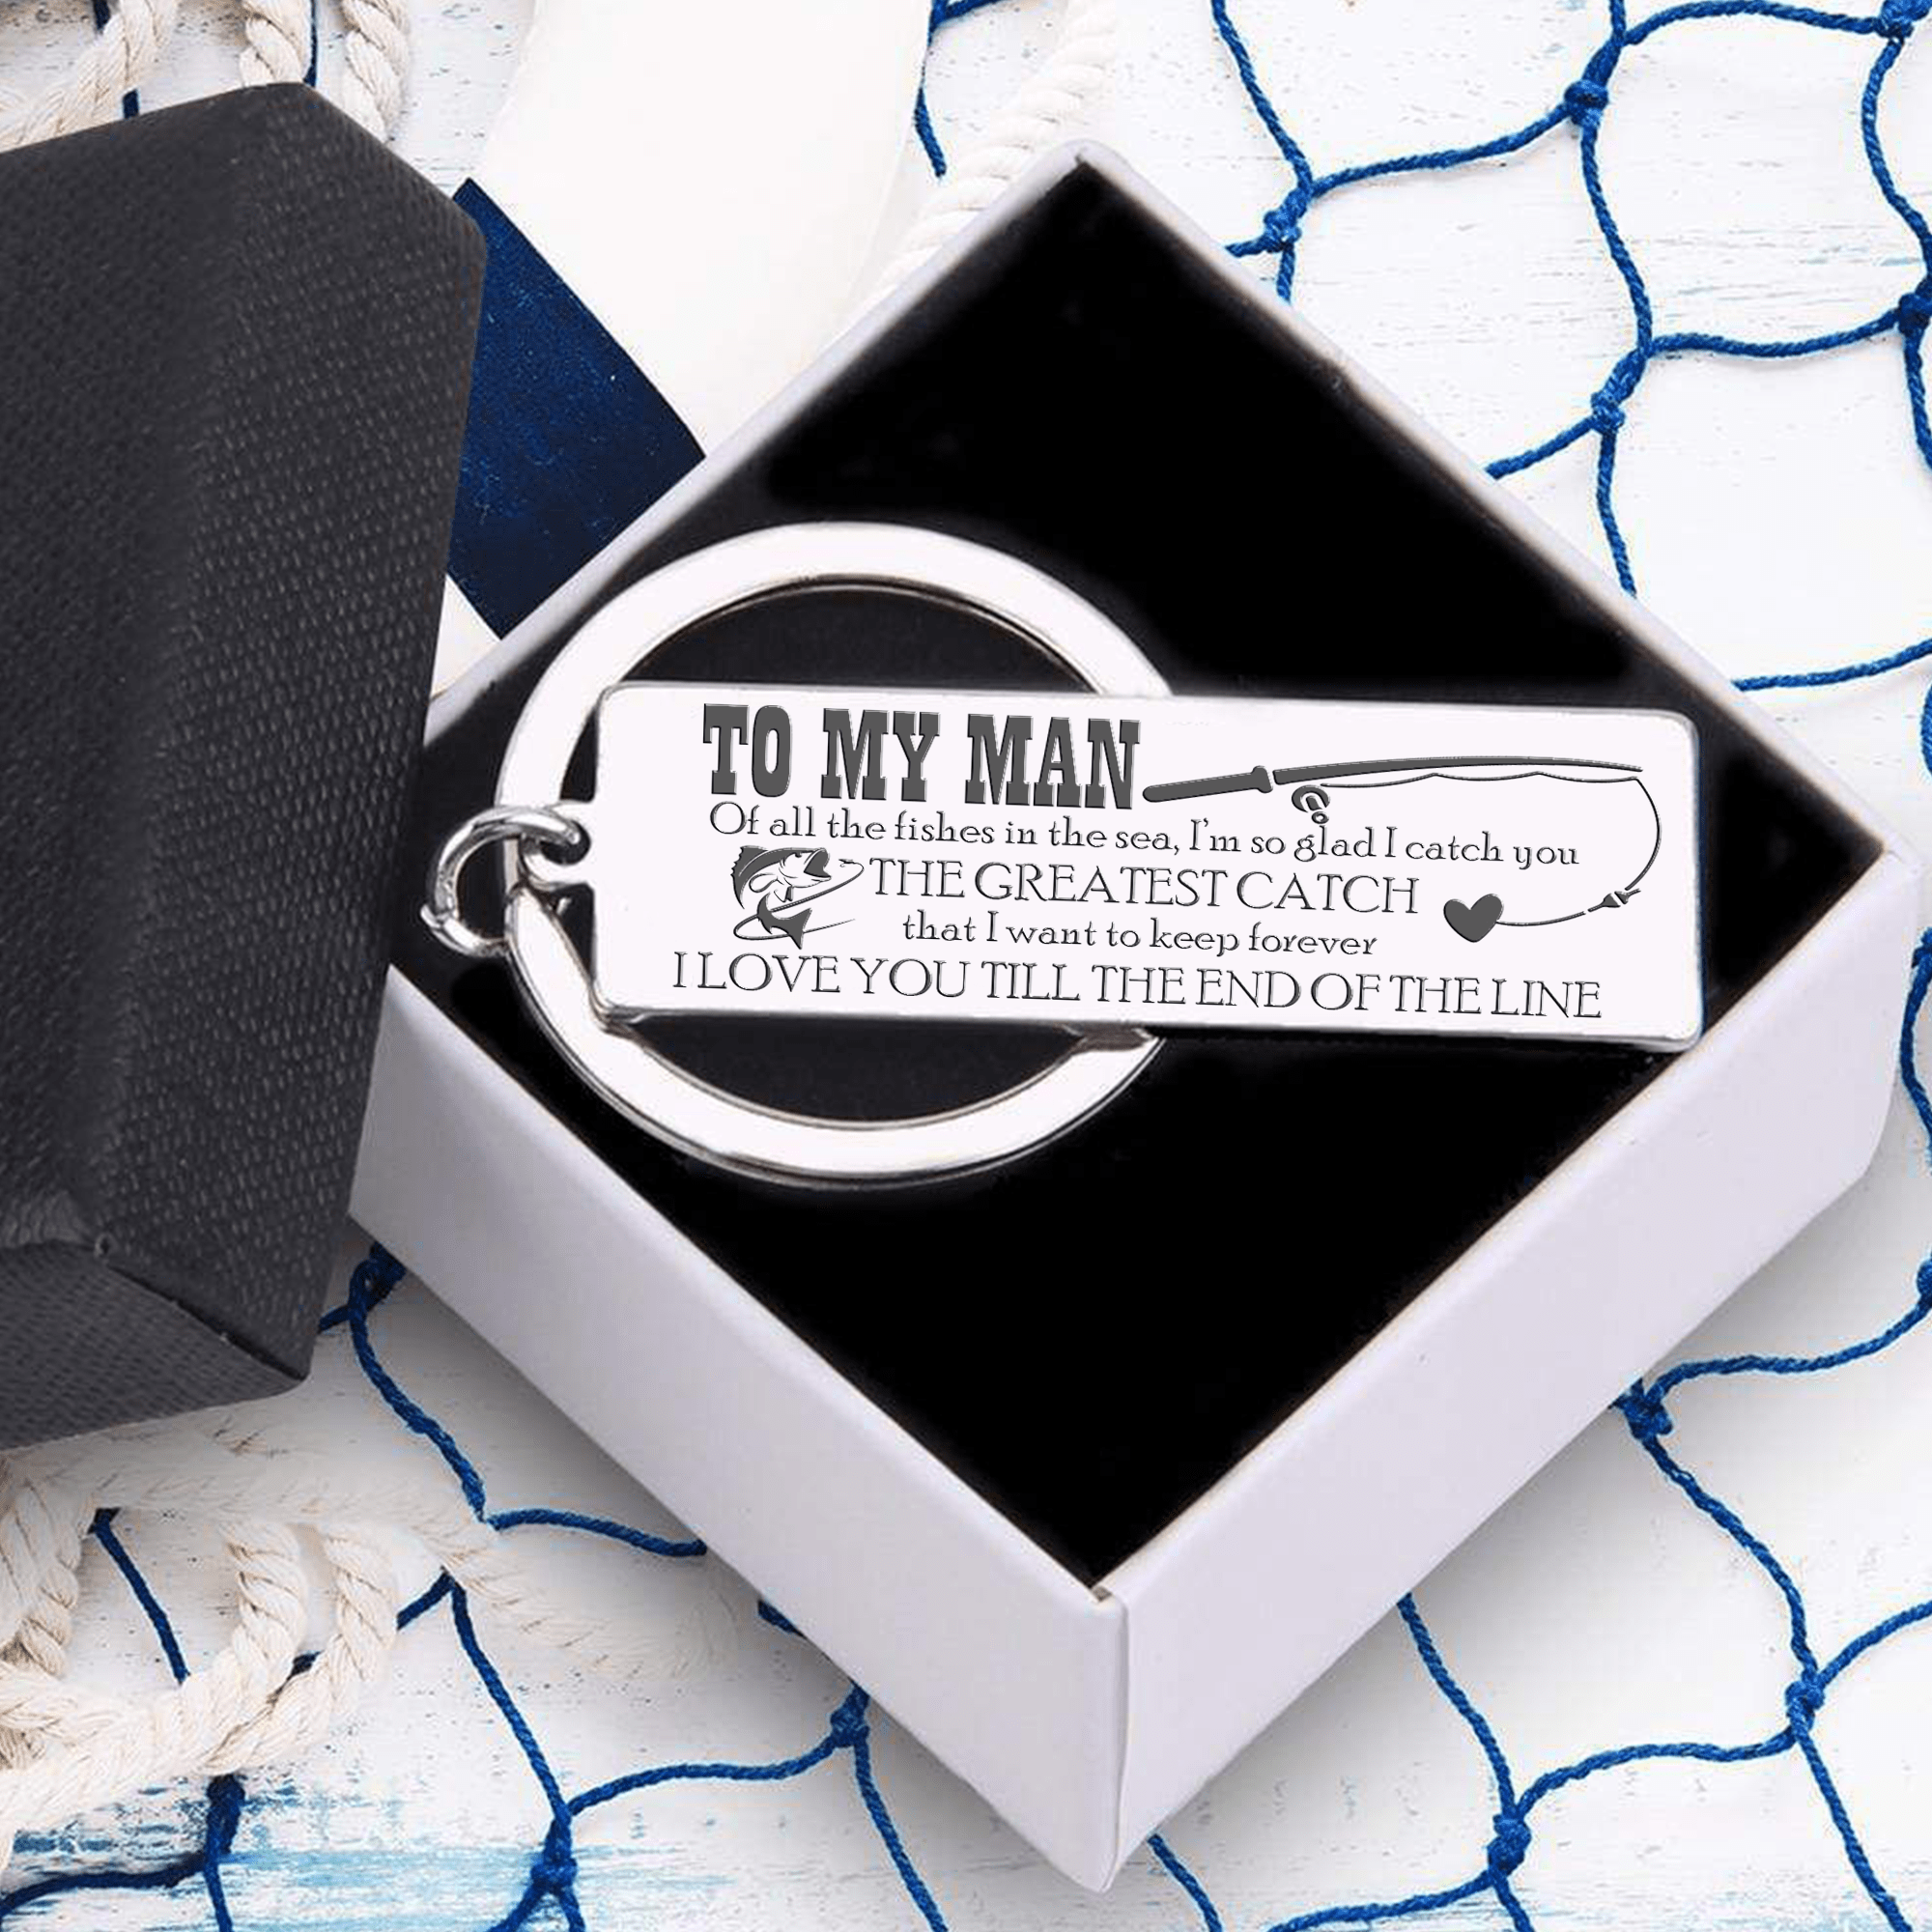 Engraved Keychain - Family - To My Man - The Greatest Catch That I Want To Keep Forever - Gkc26091